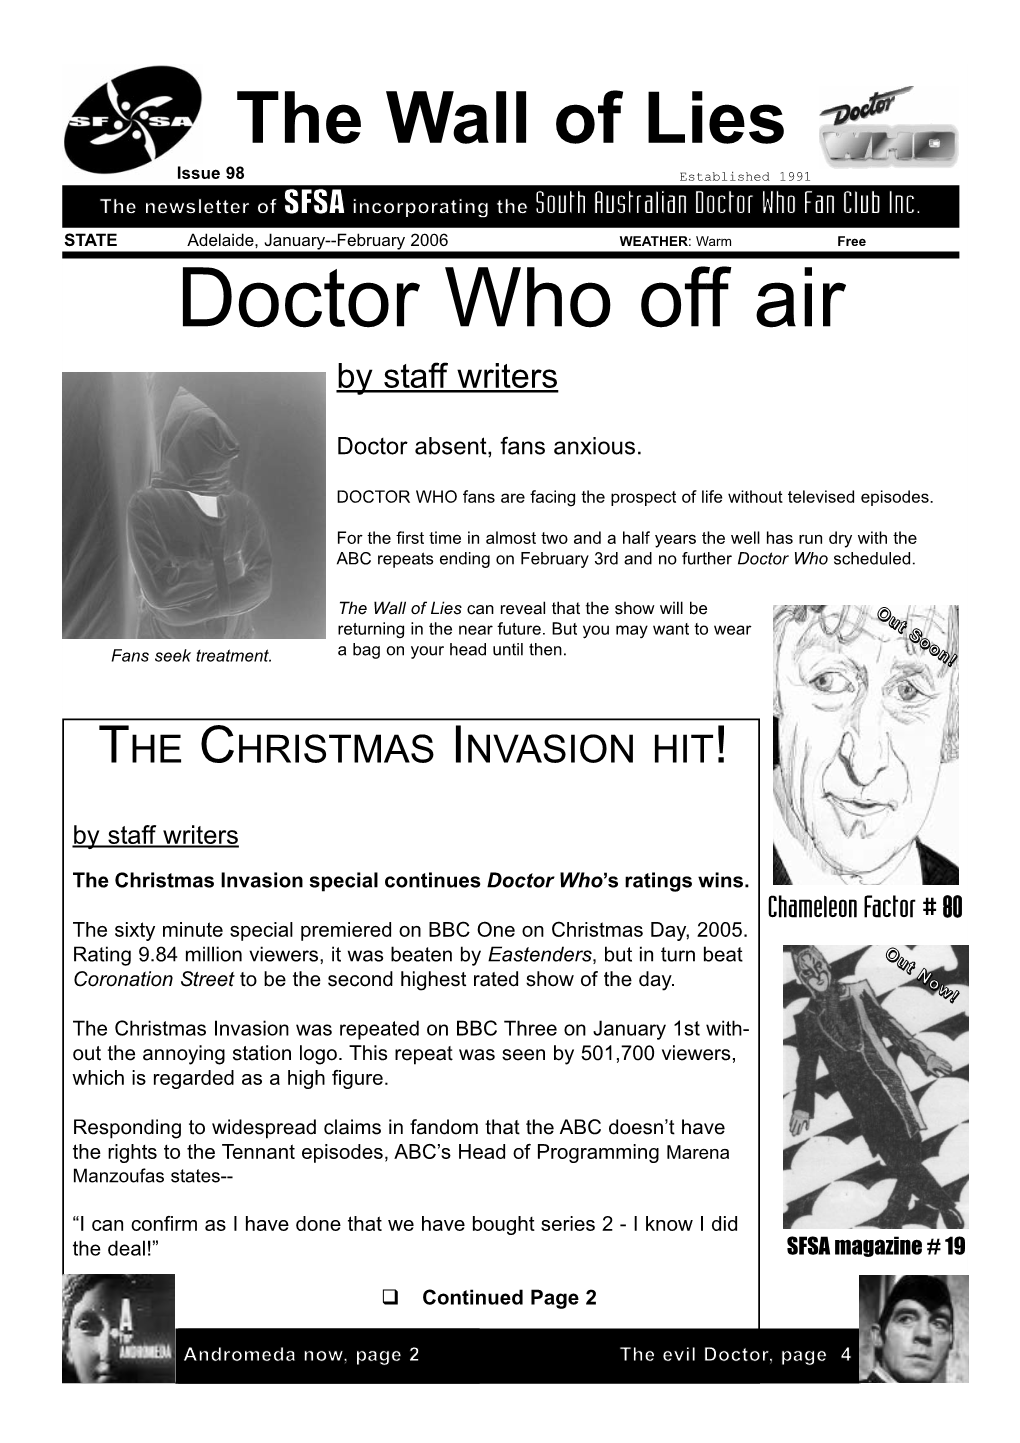 The Wall of Lies Issue 98 Established 1991 the Newsletter of SFSA Incorporating the South Australian Doctor Who Fan Club Inc